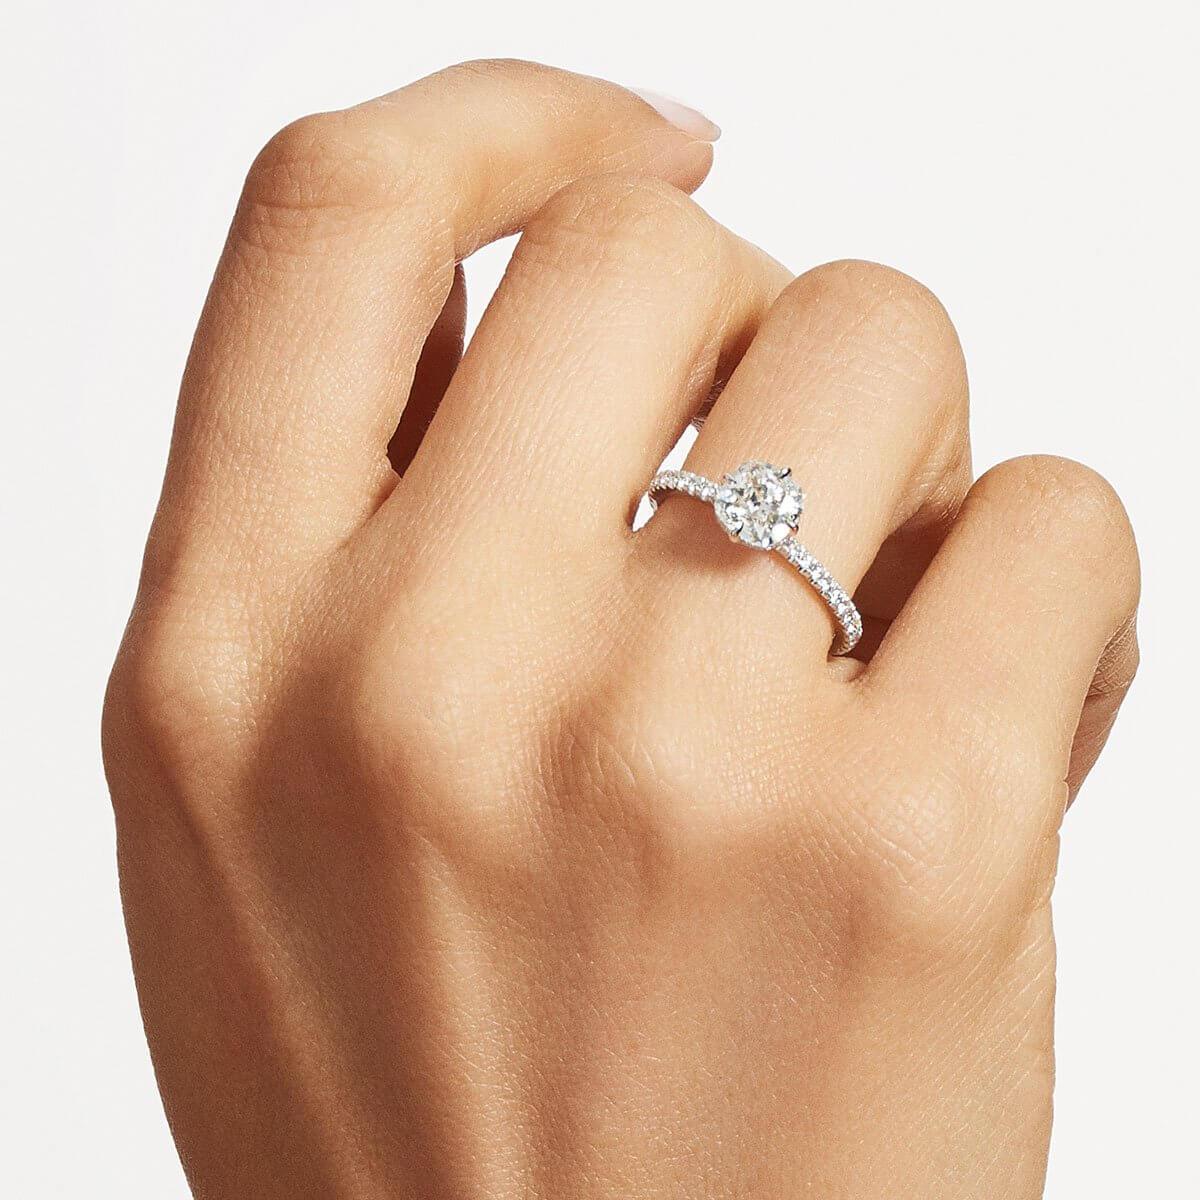 Get the Perfect Design Solitaire Engagement Rings | GLAMIRA.in